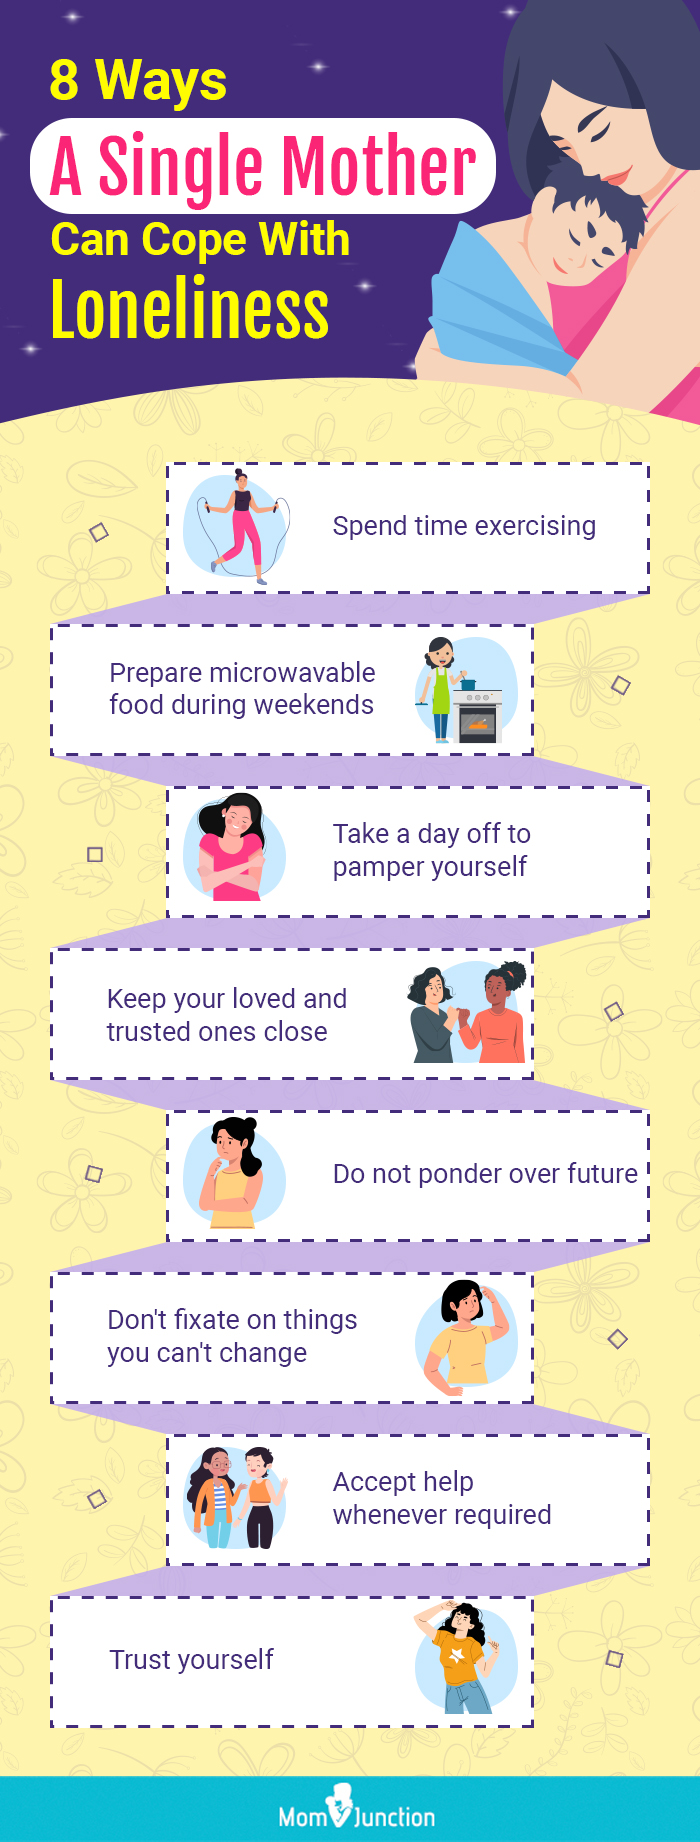 8 ways a single mother can cope with loneliness (infographic)